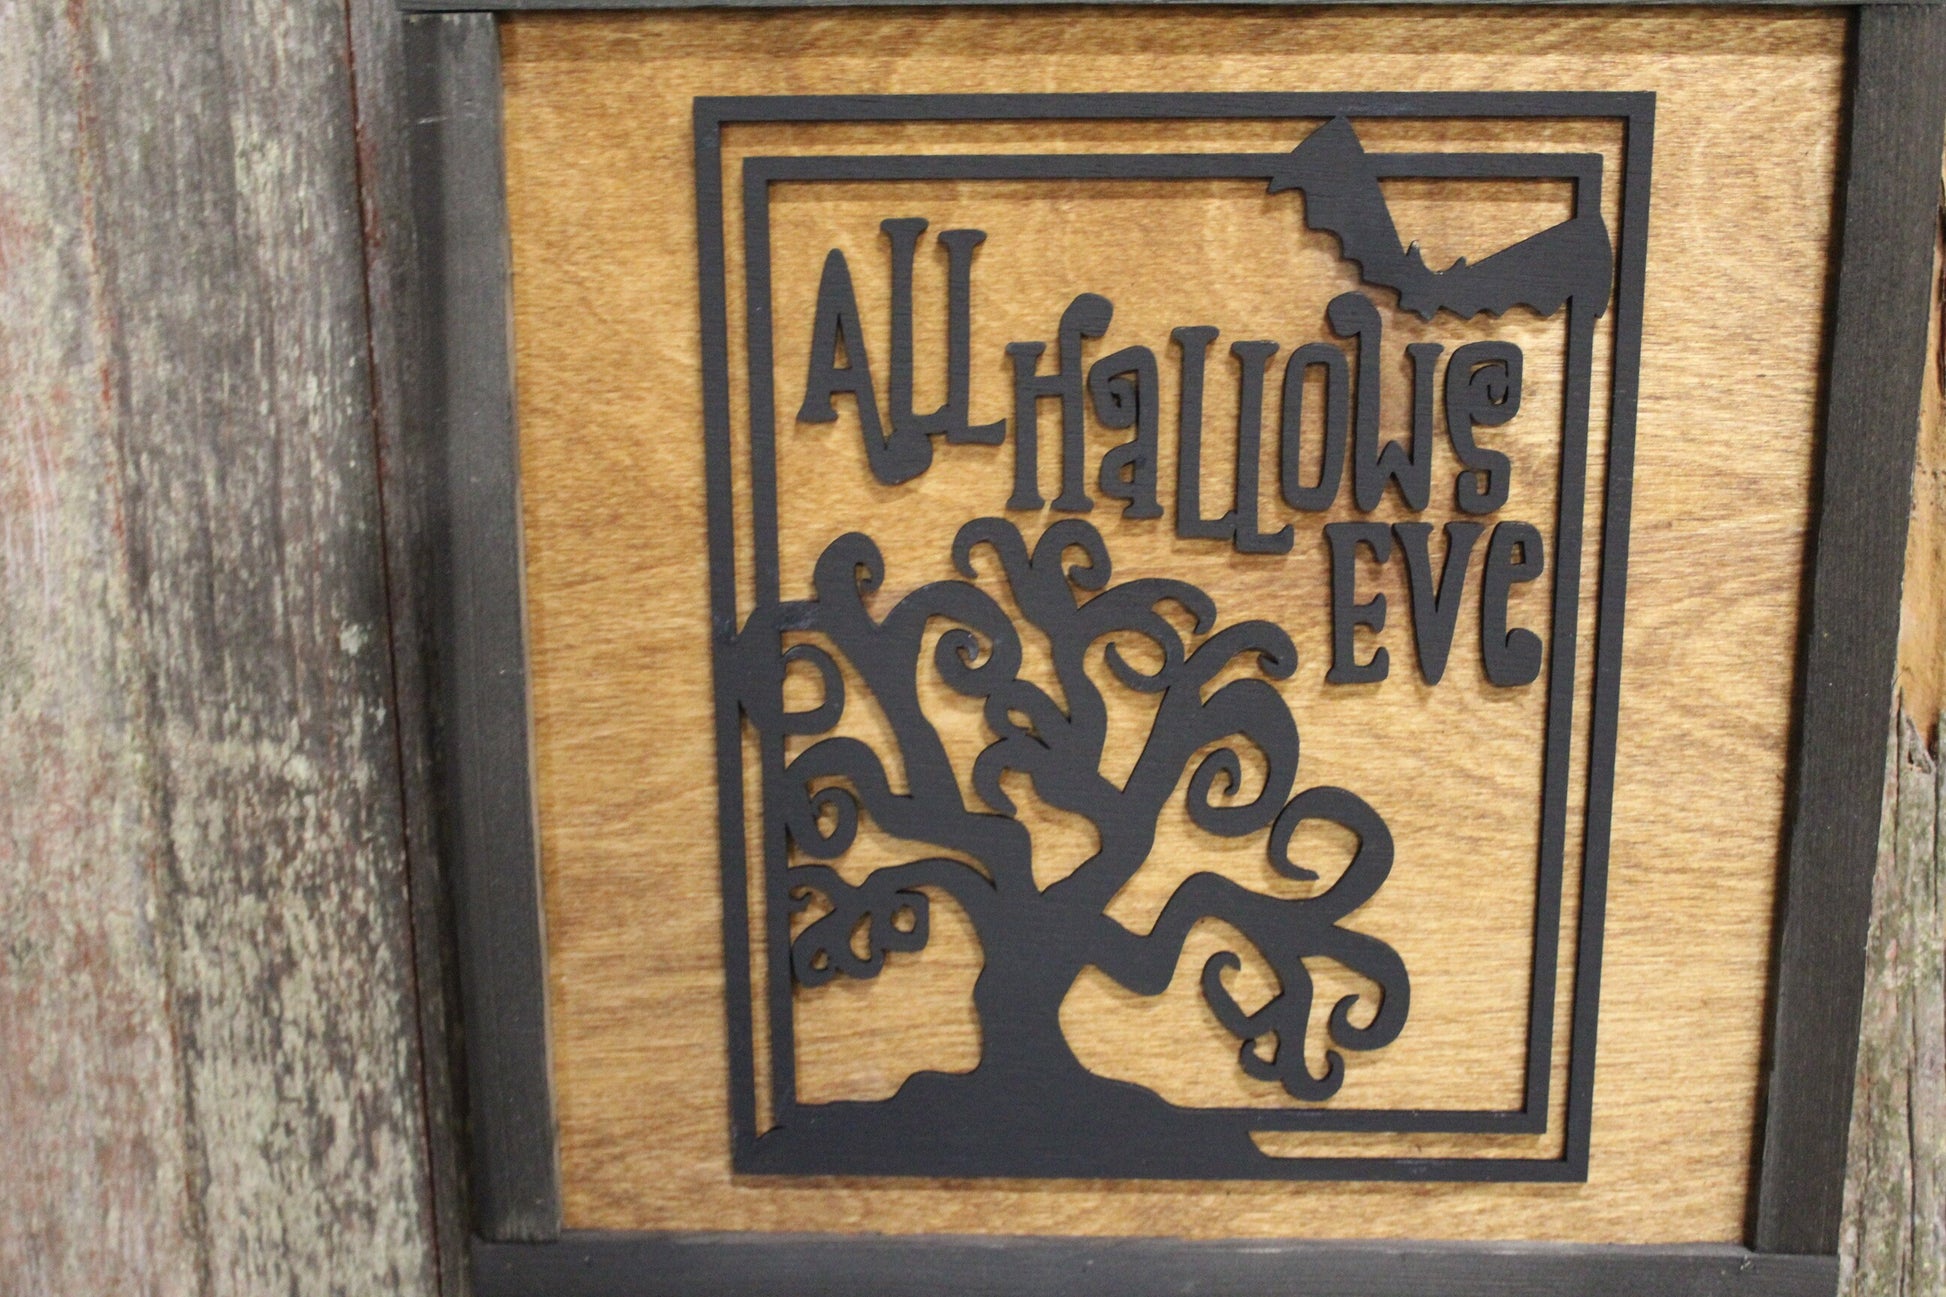 All Hallows Eve Wood Sign 3D Raised Text Script Halloween Fall Tree Bat Spooky Country Primitive Framed Wall Hanging Decoration Porch Decor